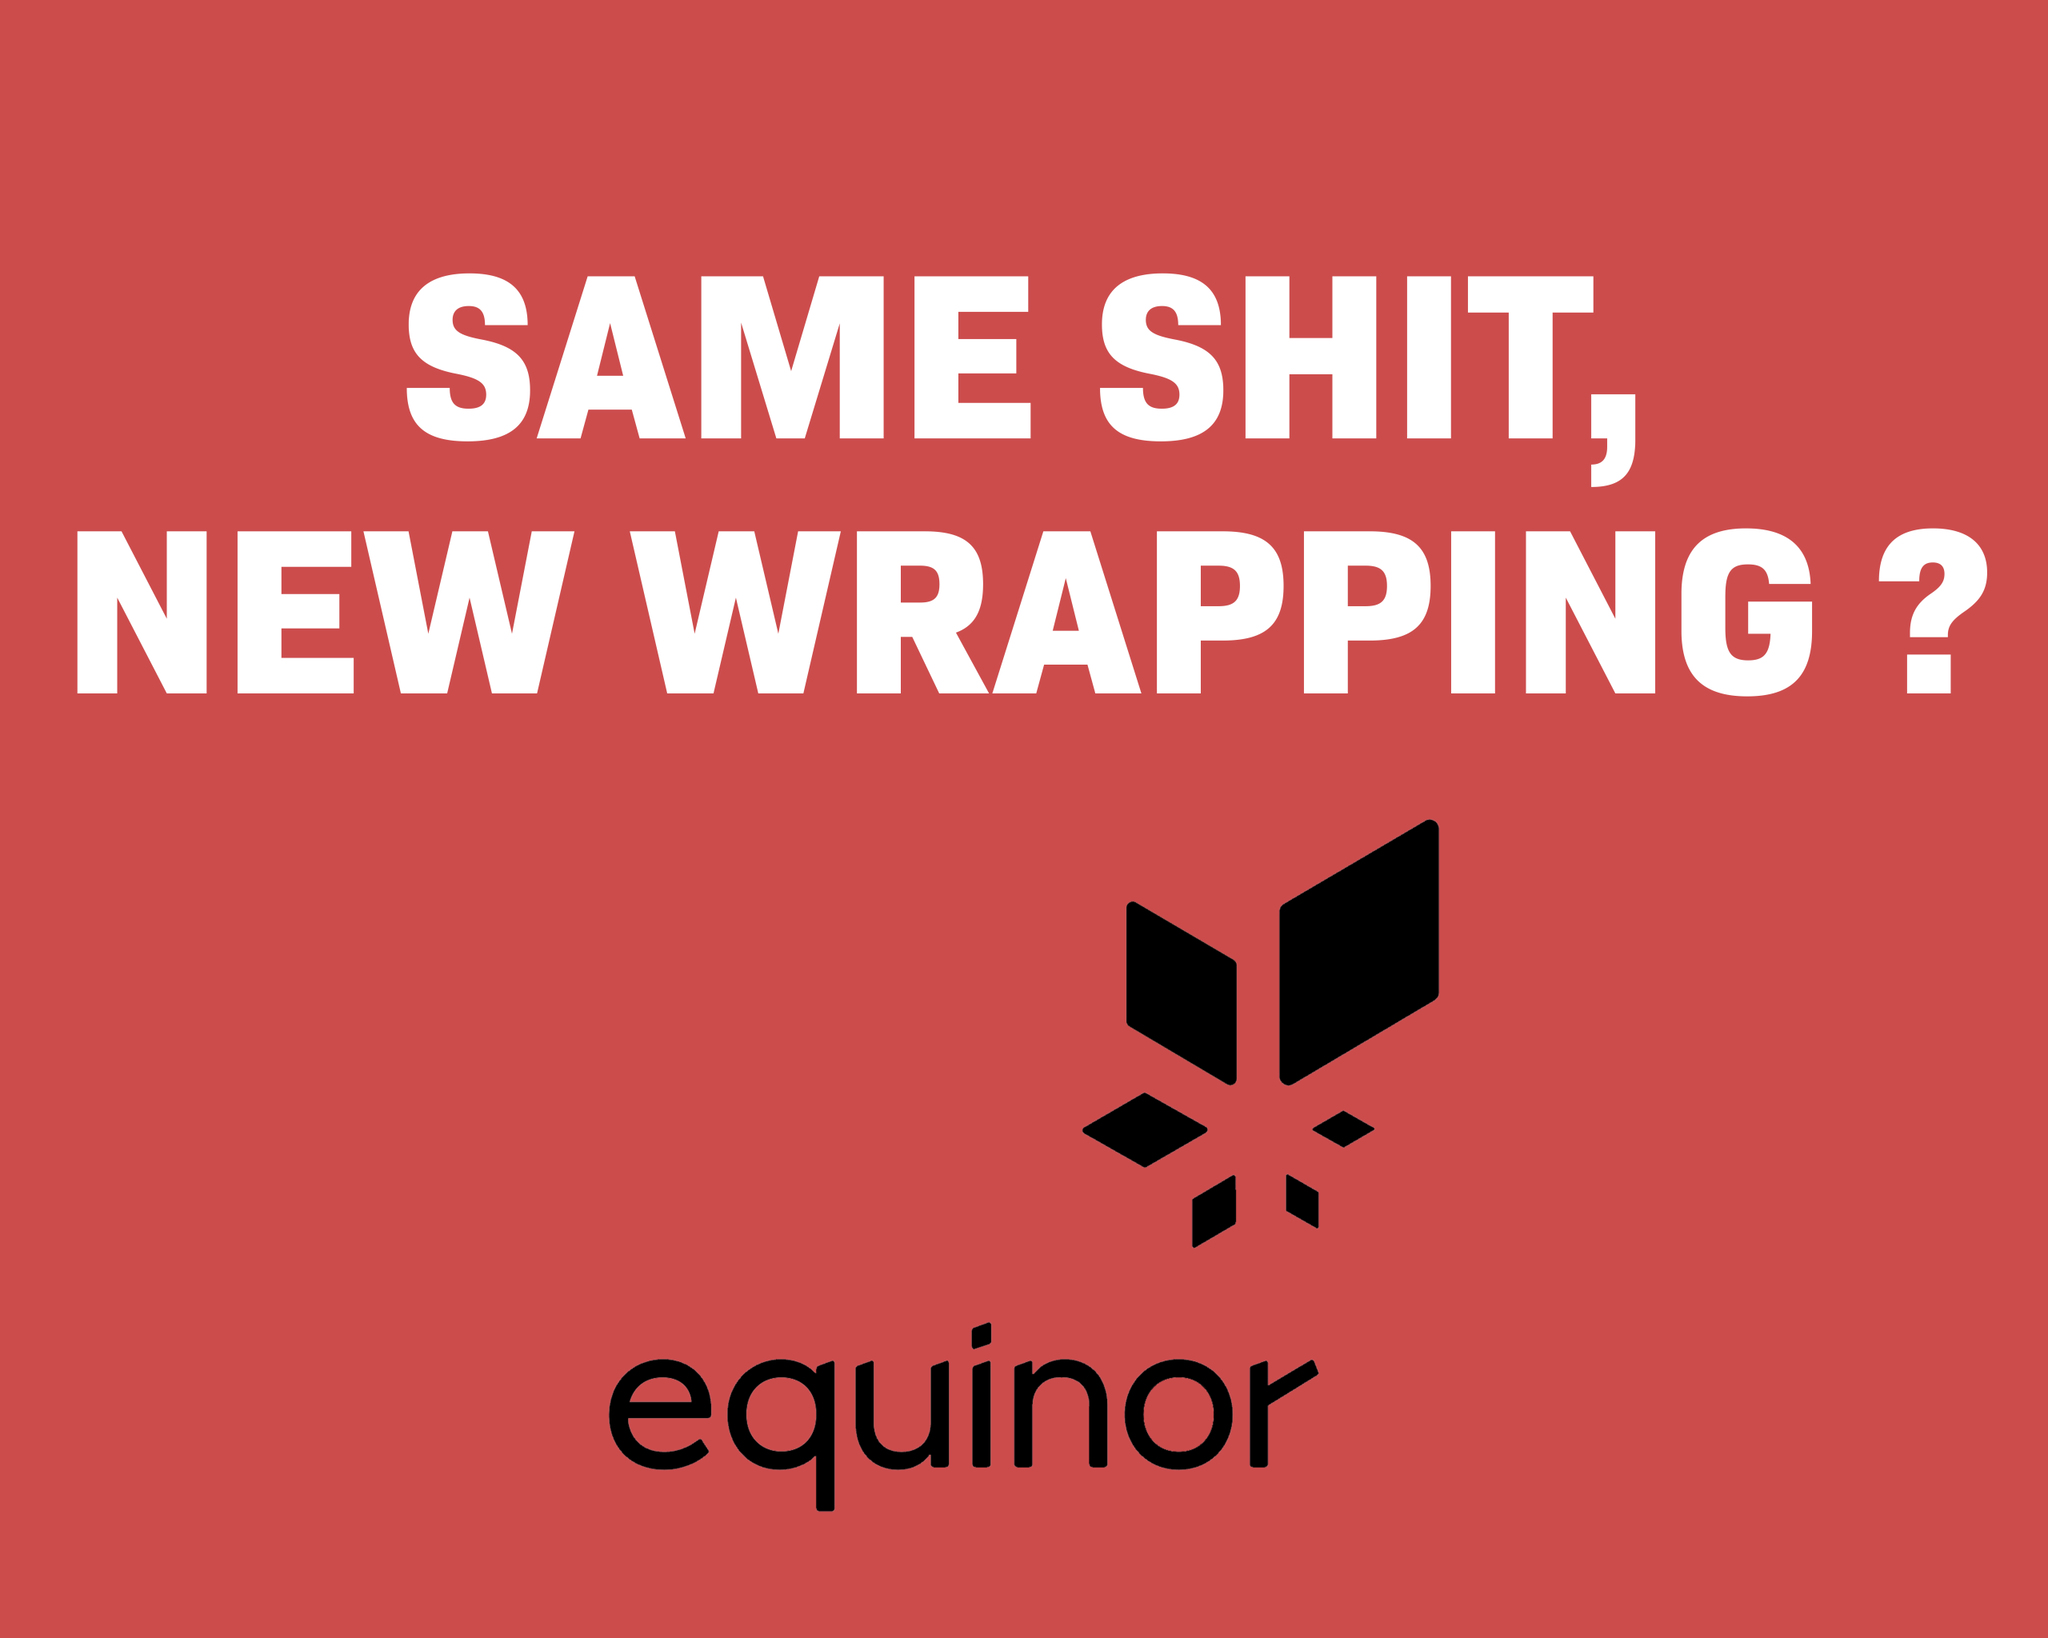 "Same shit, new wrapping? Equinor"